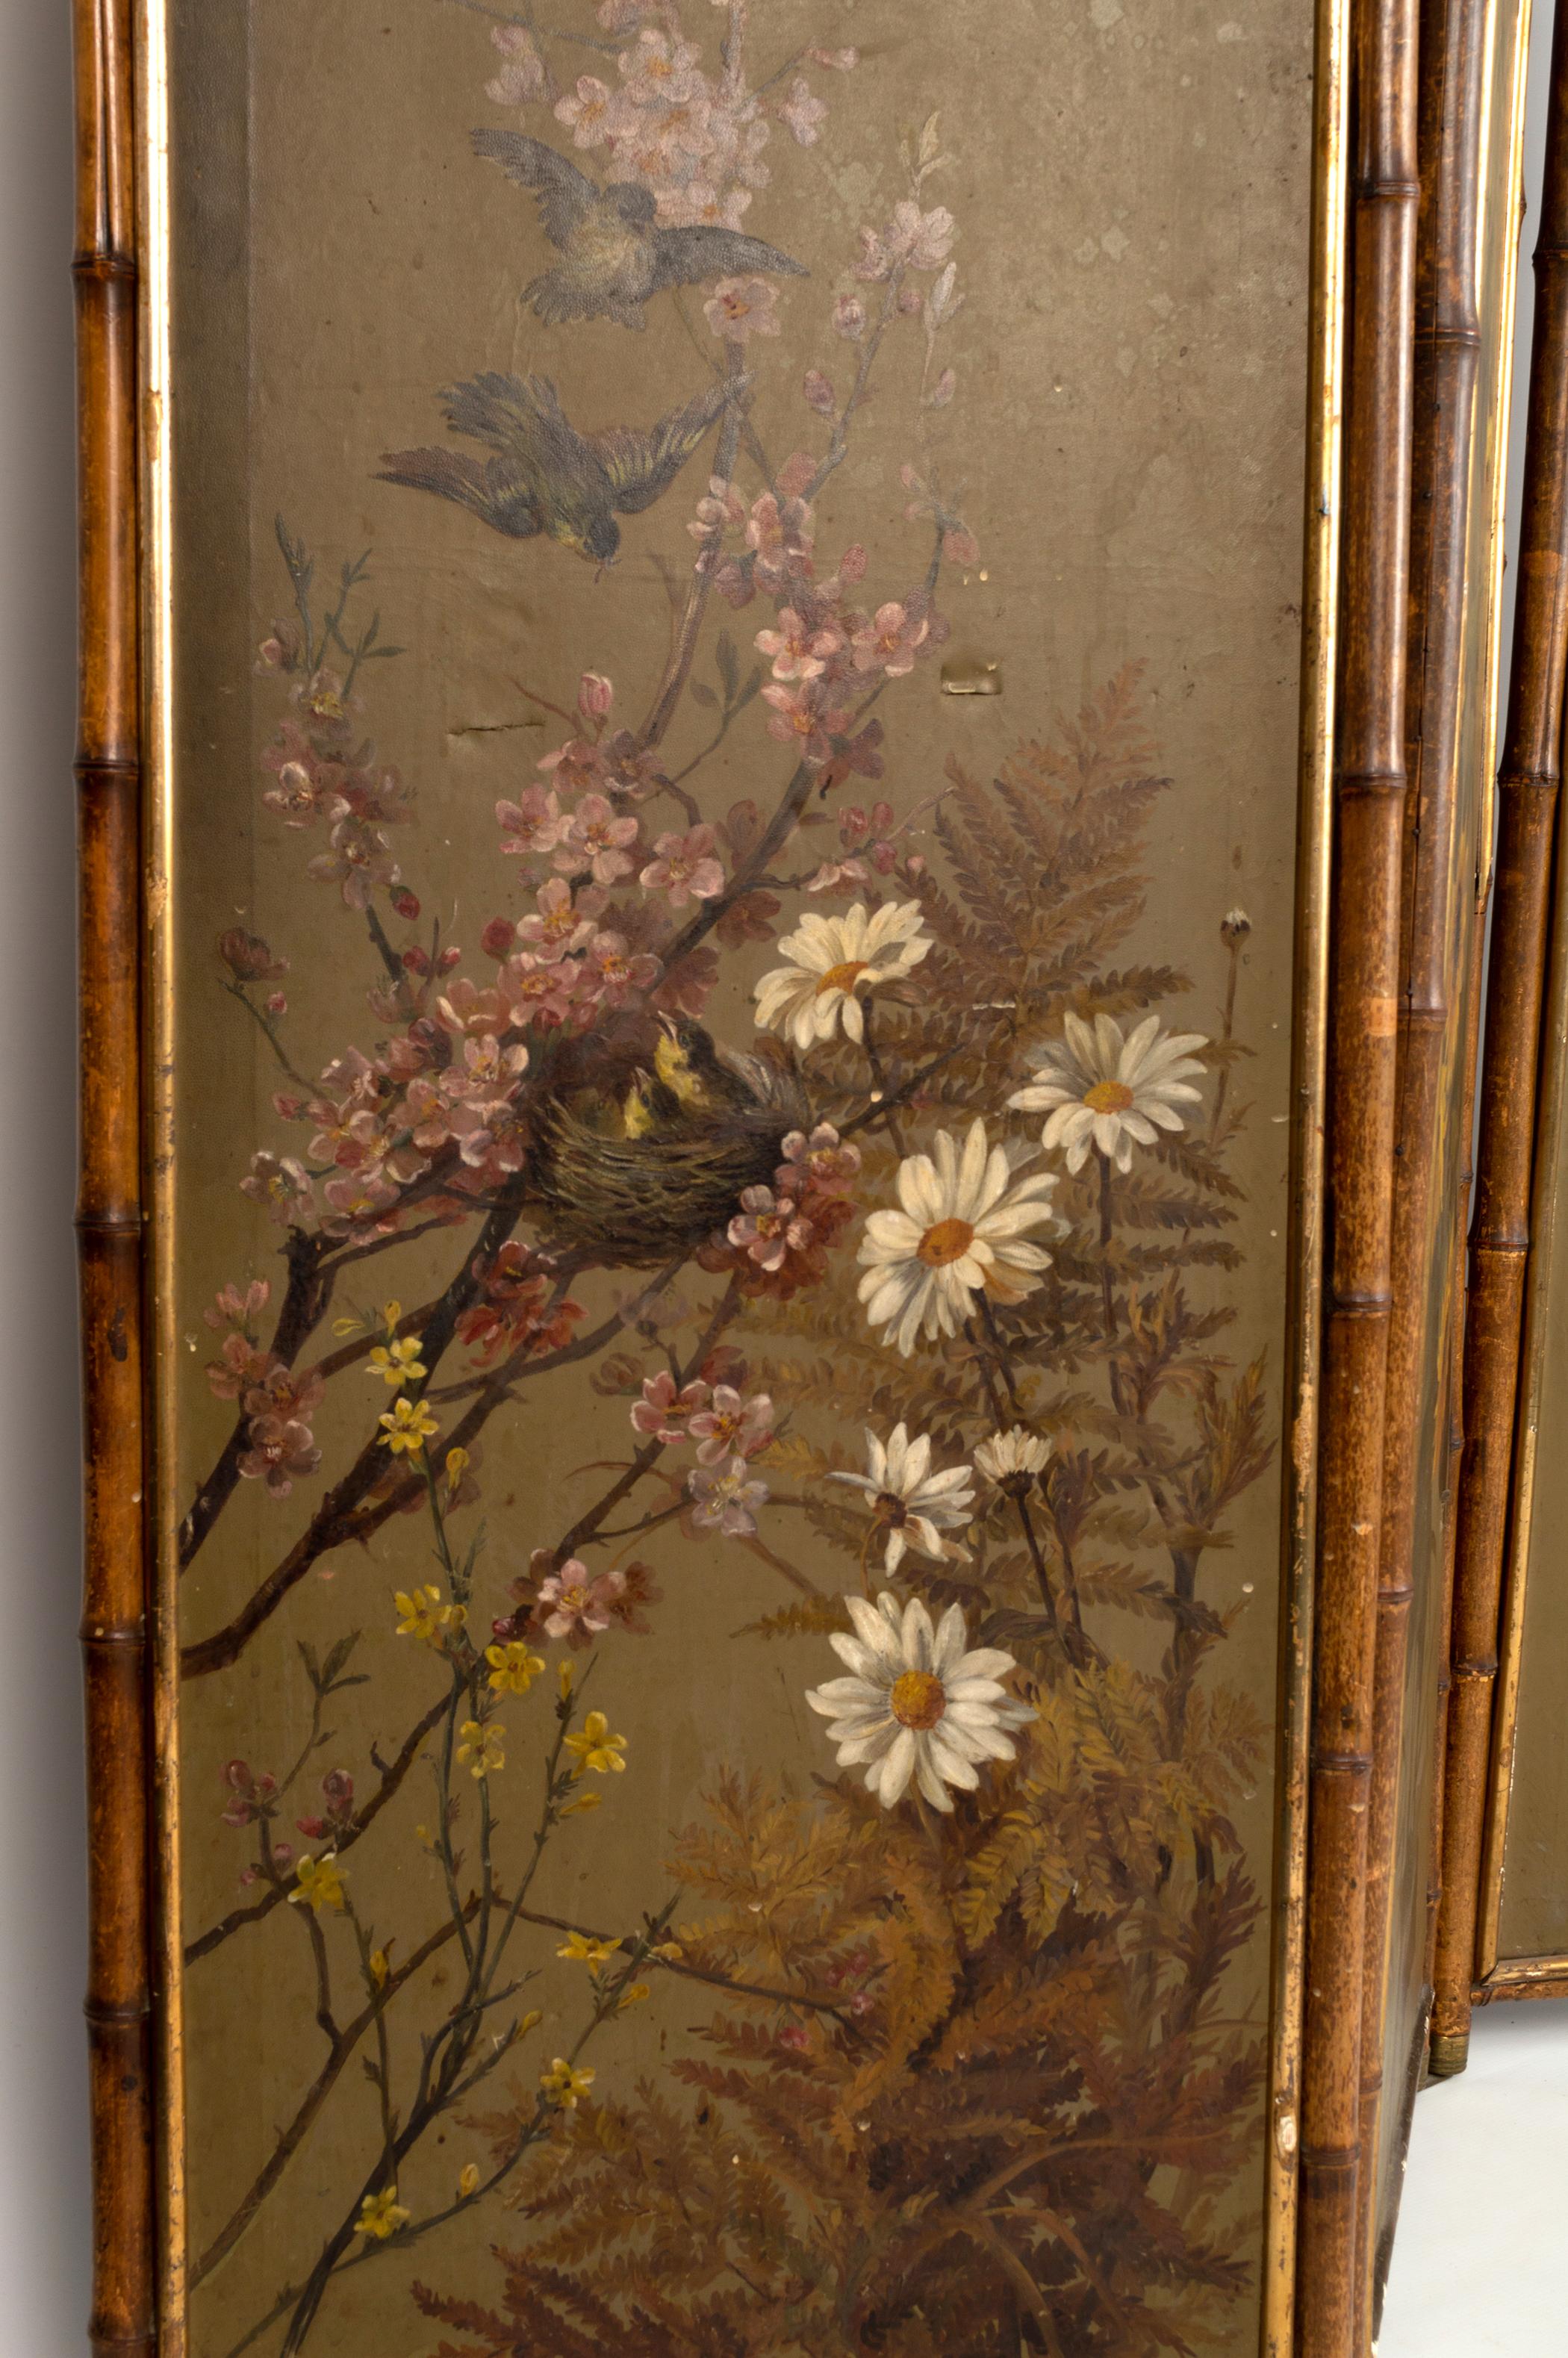 A 19th Century Anglo-Chinese three fold bamboo screen with later added botanical painted leatherette panels dating from C.1920. Finished in brass detailing with filigree fretwork tops.

A beautiful decorators piece. In good unrestored condition,